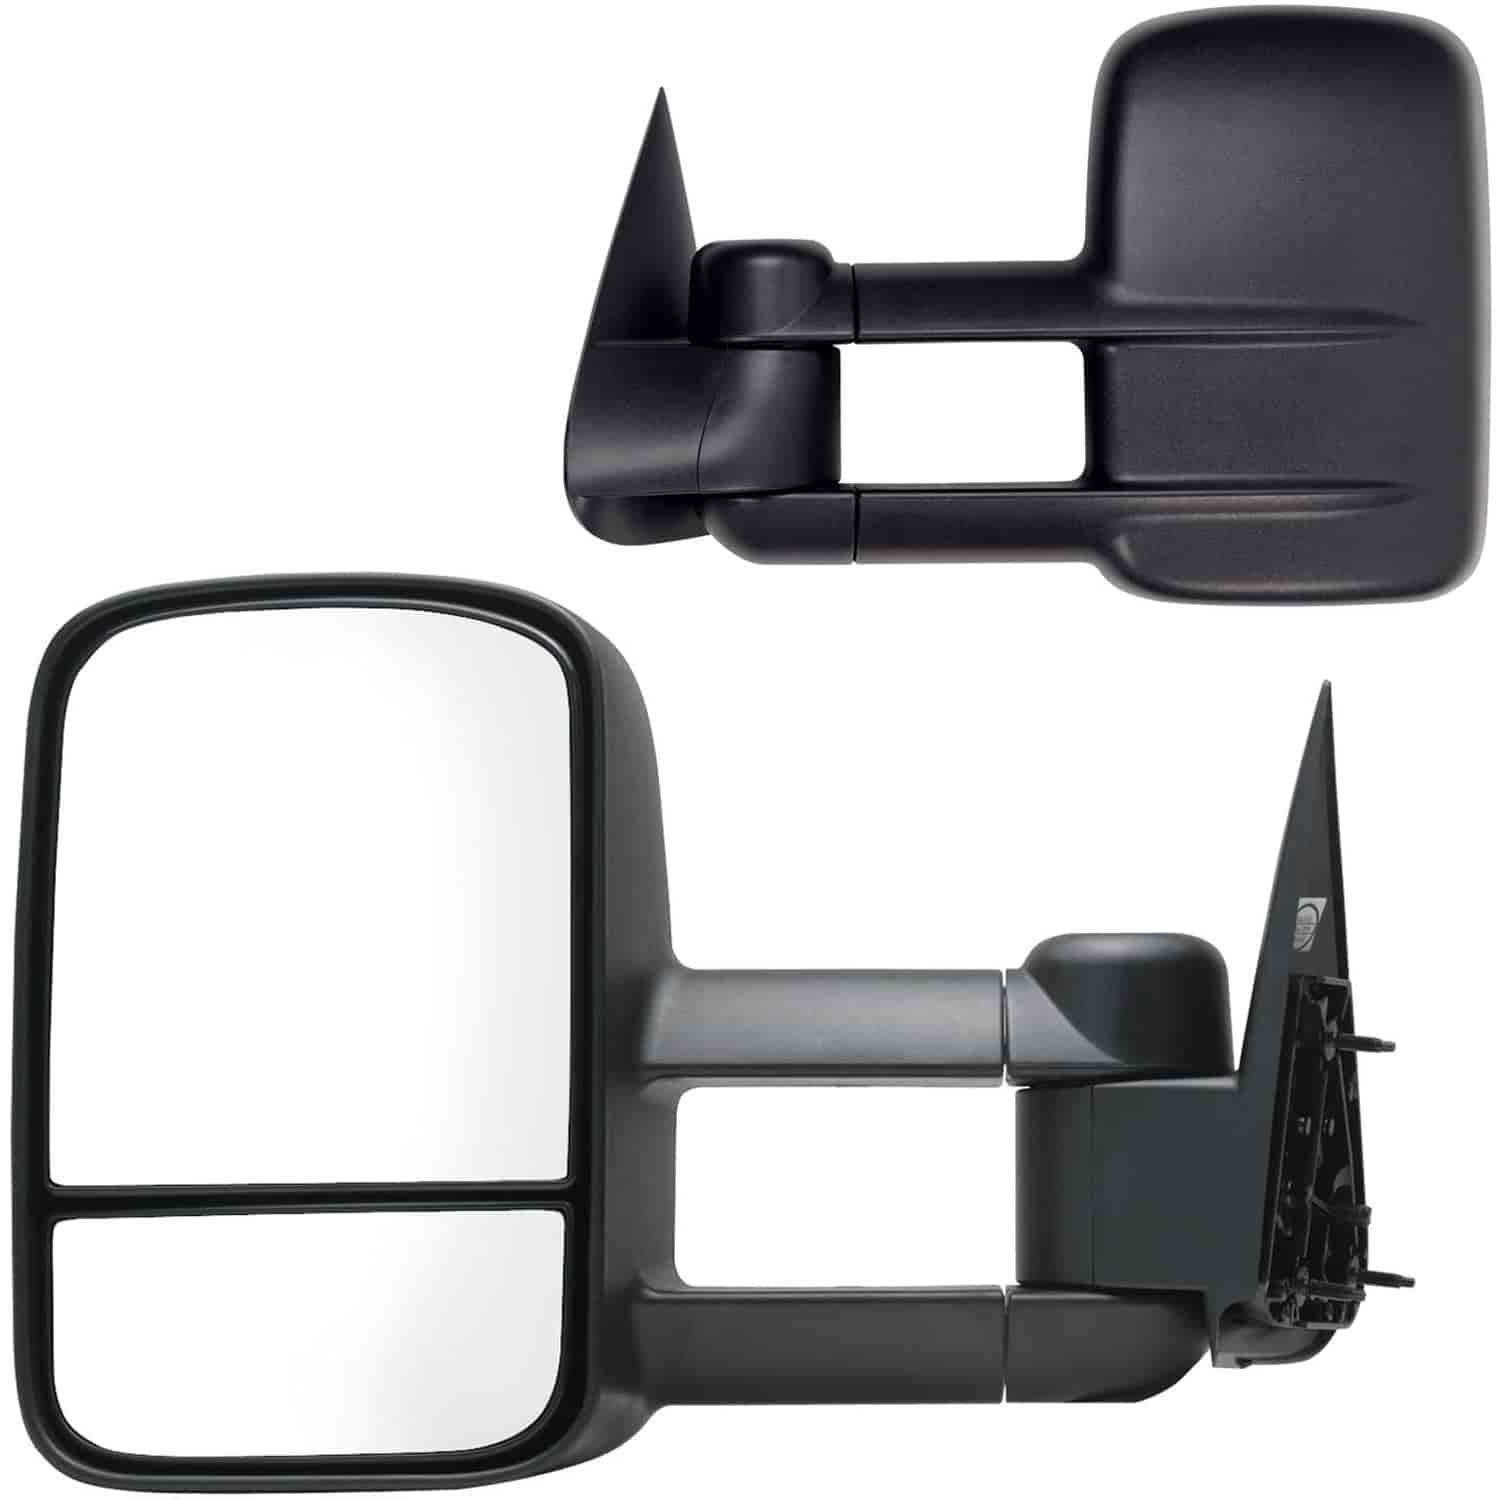 OEM Style Replacement Mirrors Fits 1999 to 2006 Chevy Silverado & GMC Sierra